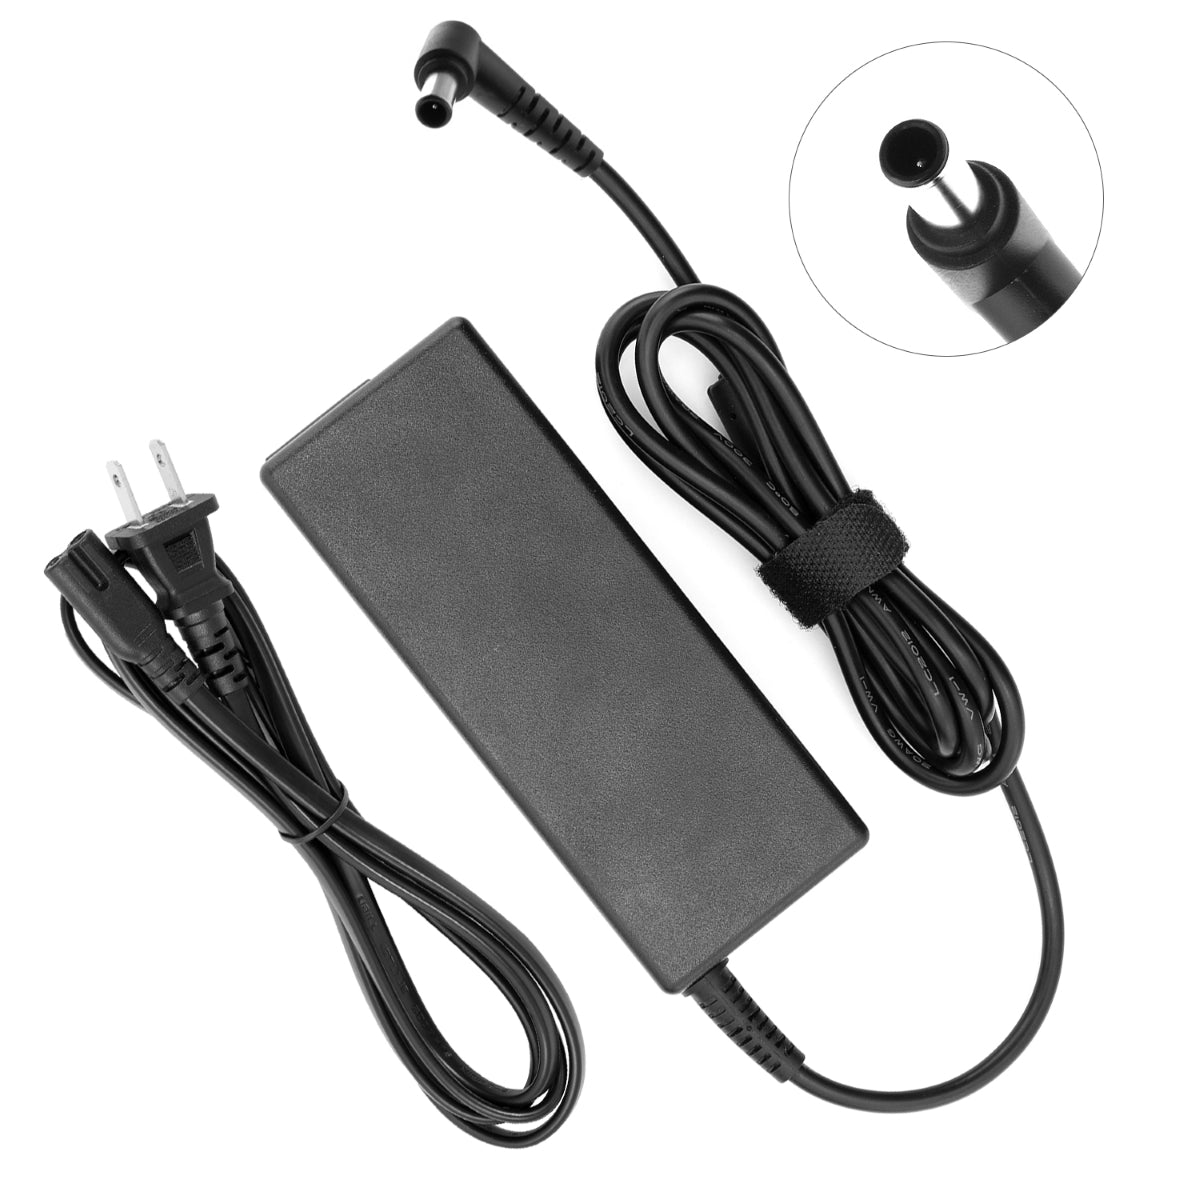 Compatible Charger for Sony Vaio PCG-71312M